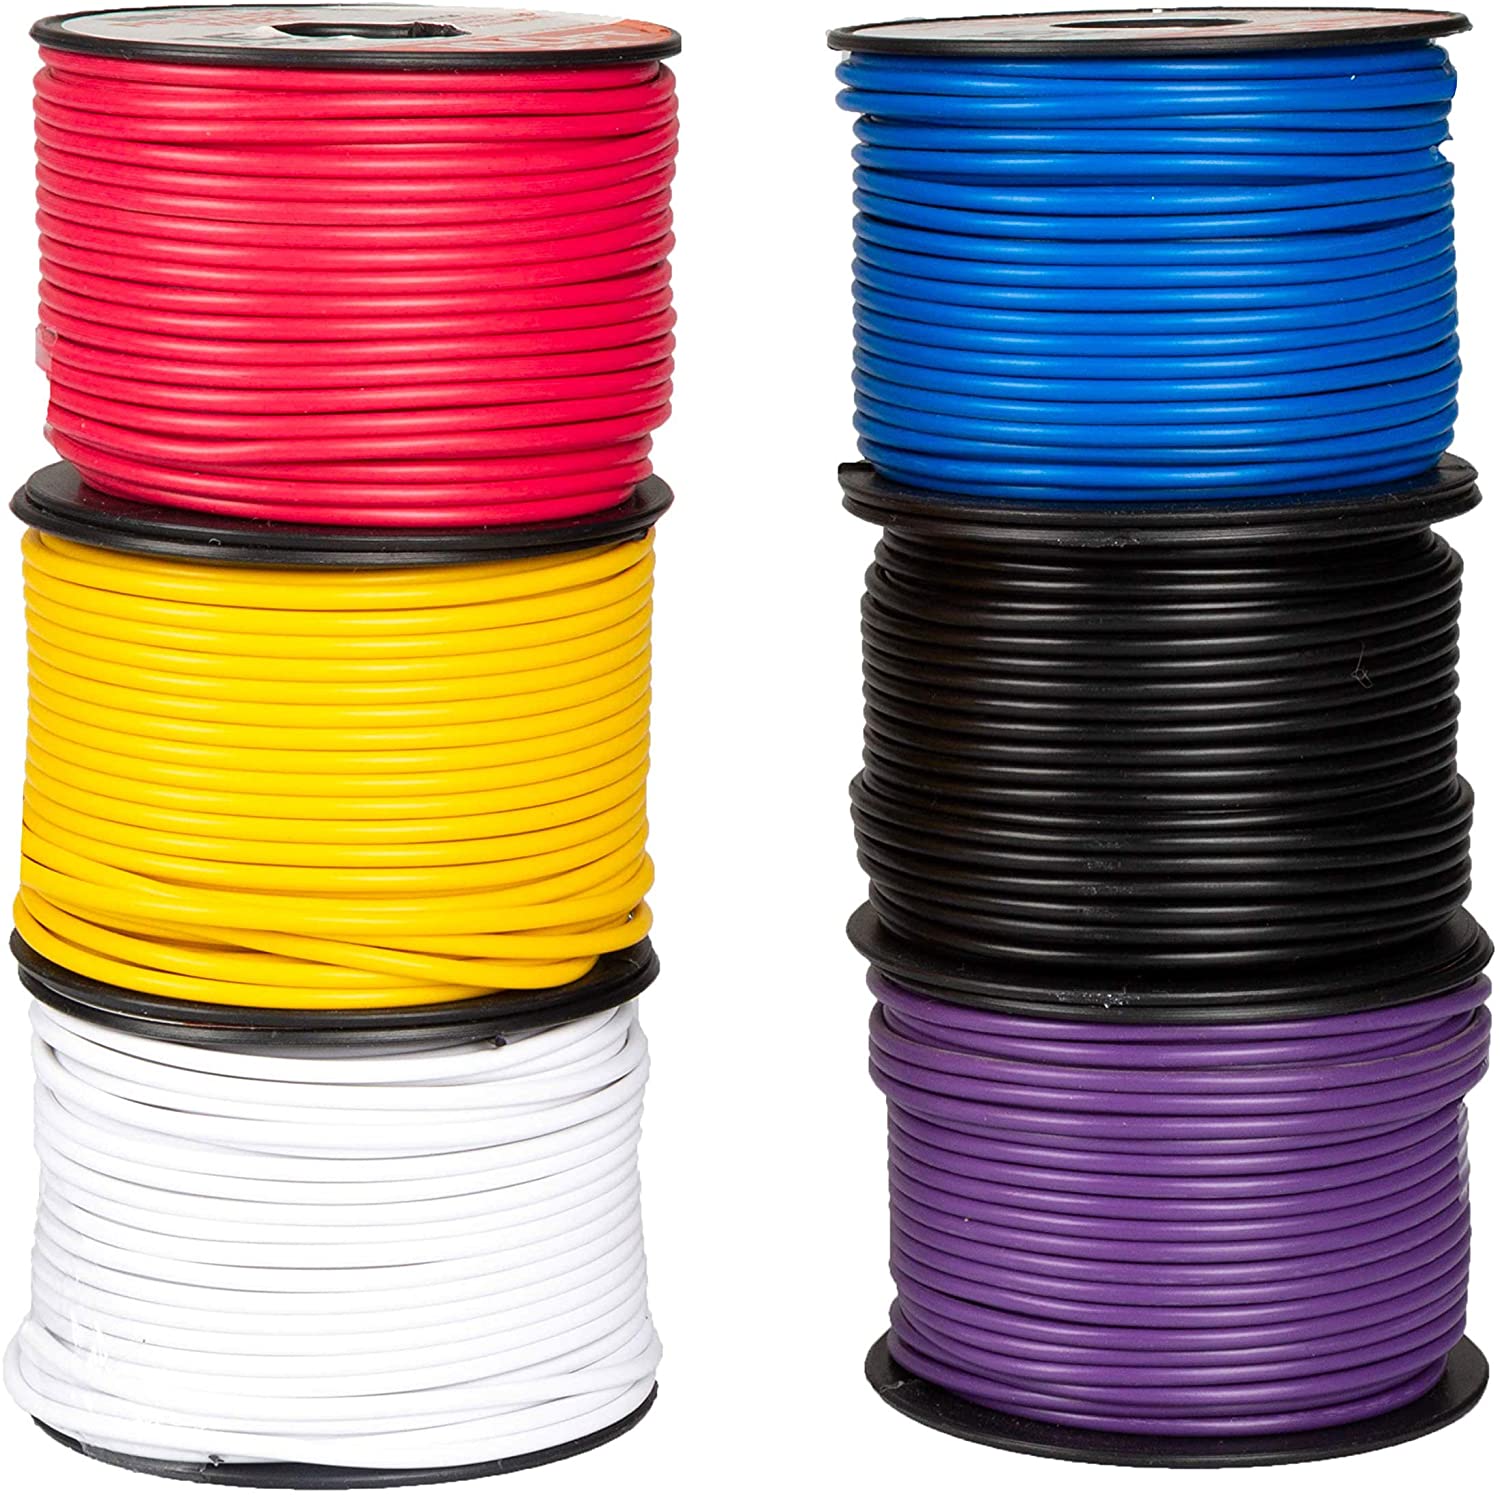 5) Spools 14 Gauge Wire 100 FT Primary AWG - Red Black White Blue Yellow -  USA